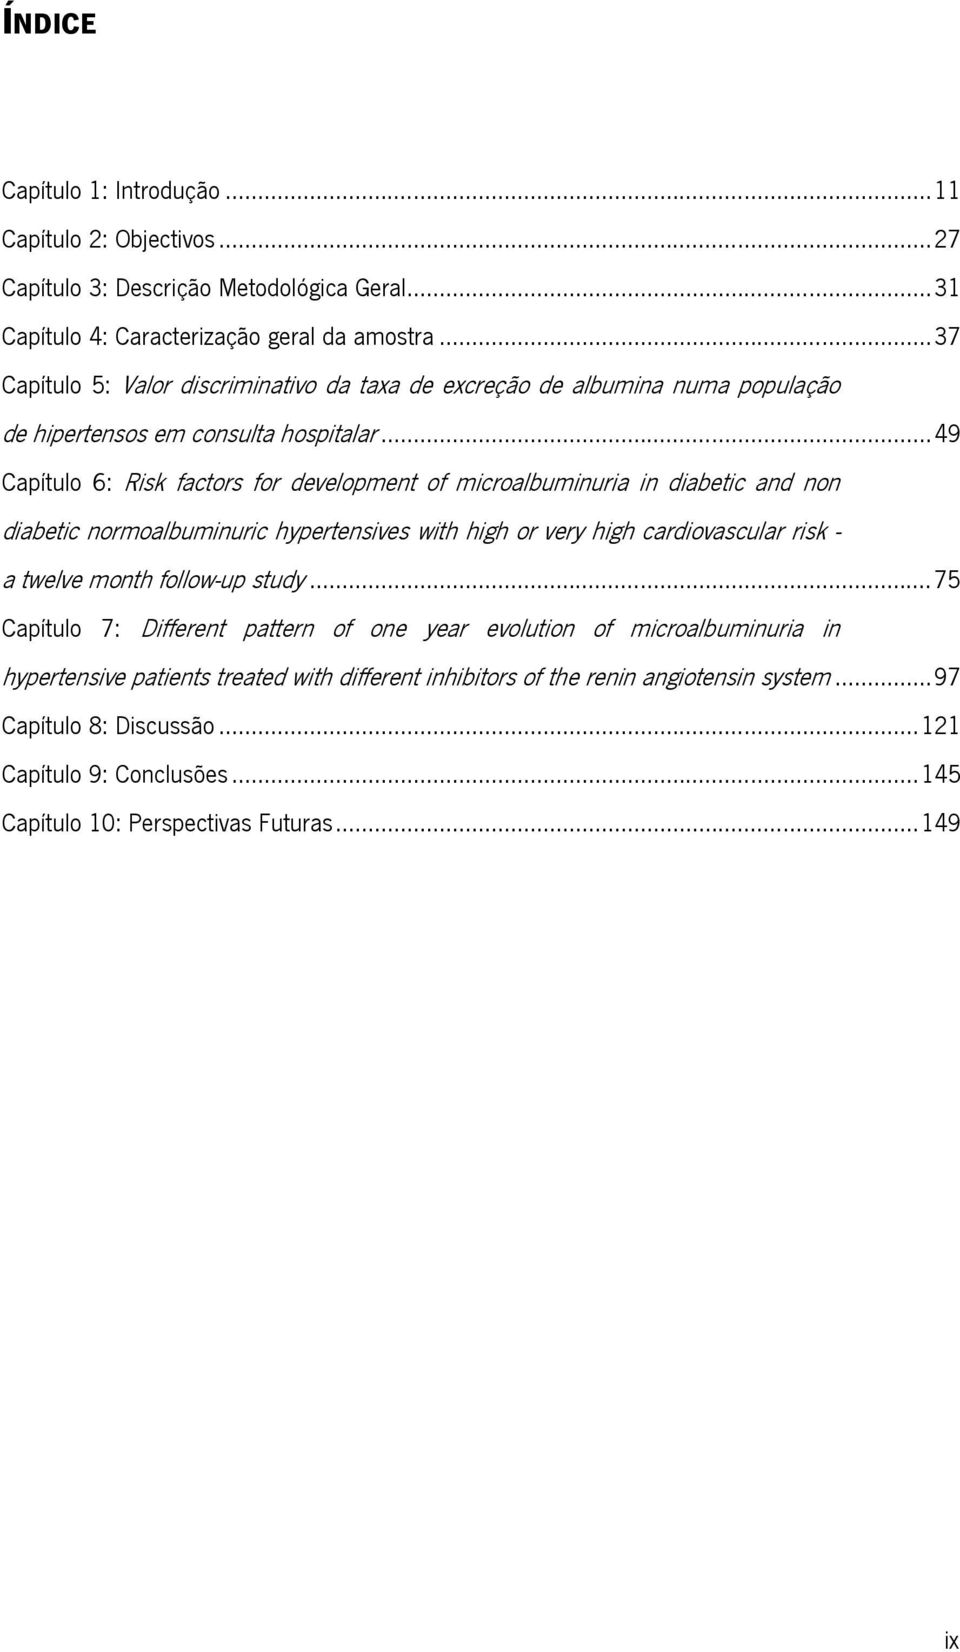 ..49 Capítulo 6: Risk factors for development of microalbuminuria in diabetic and non diabetic normoalbuminuric hypertensives with high or very high cardiovascular risk - a twelve month